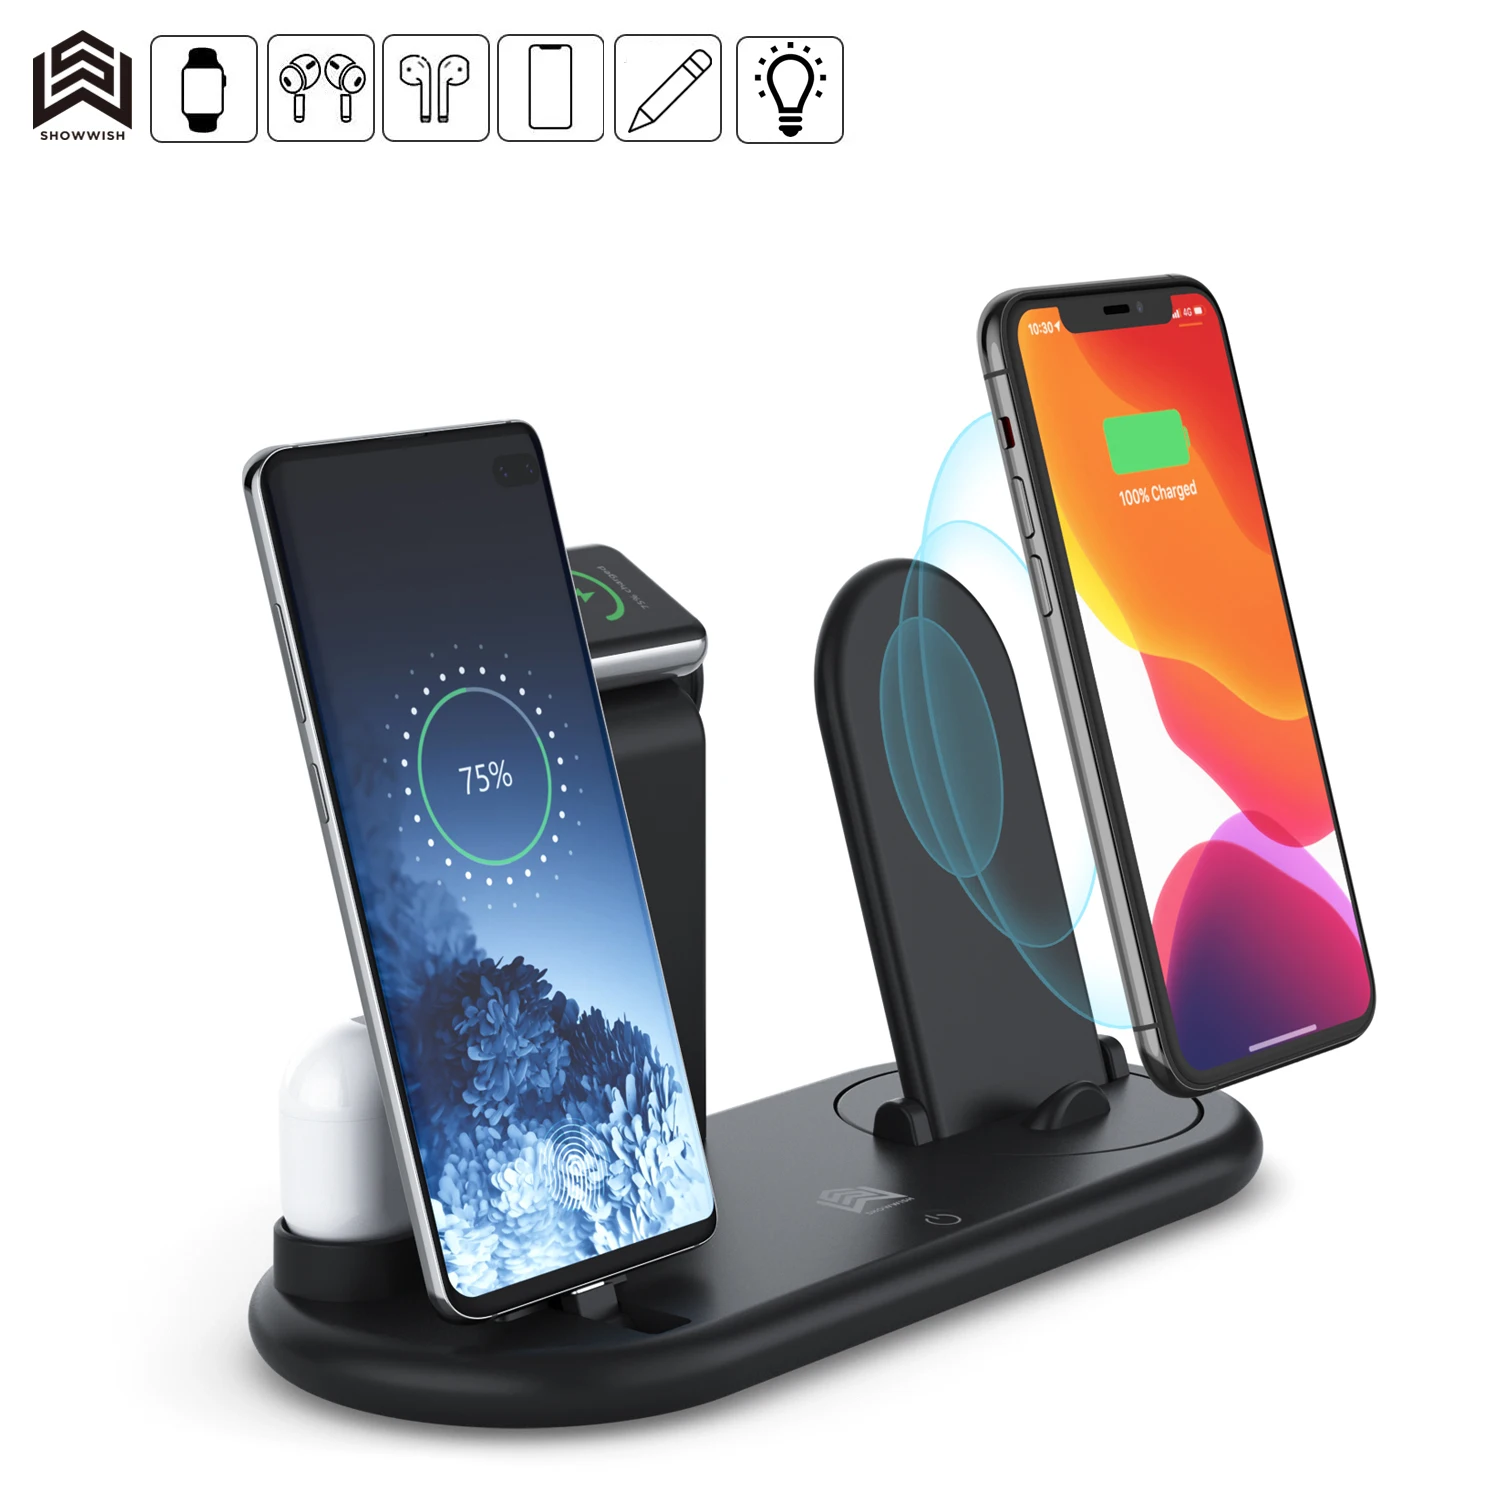 

foldable 3 in 1 wireless charger portable phone holder 10w dock station qi certified stand Pad universal fast wireless charger, Black white